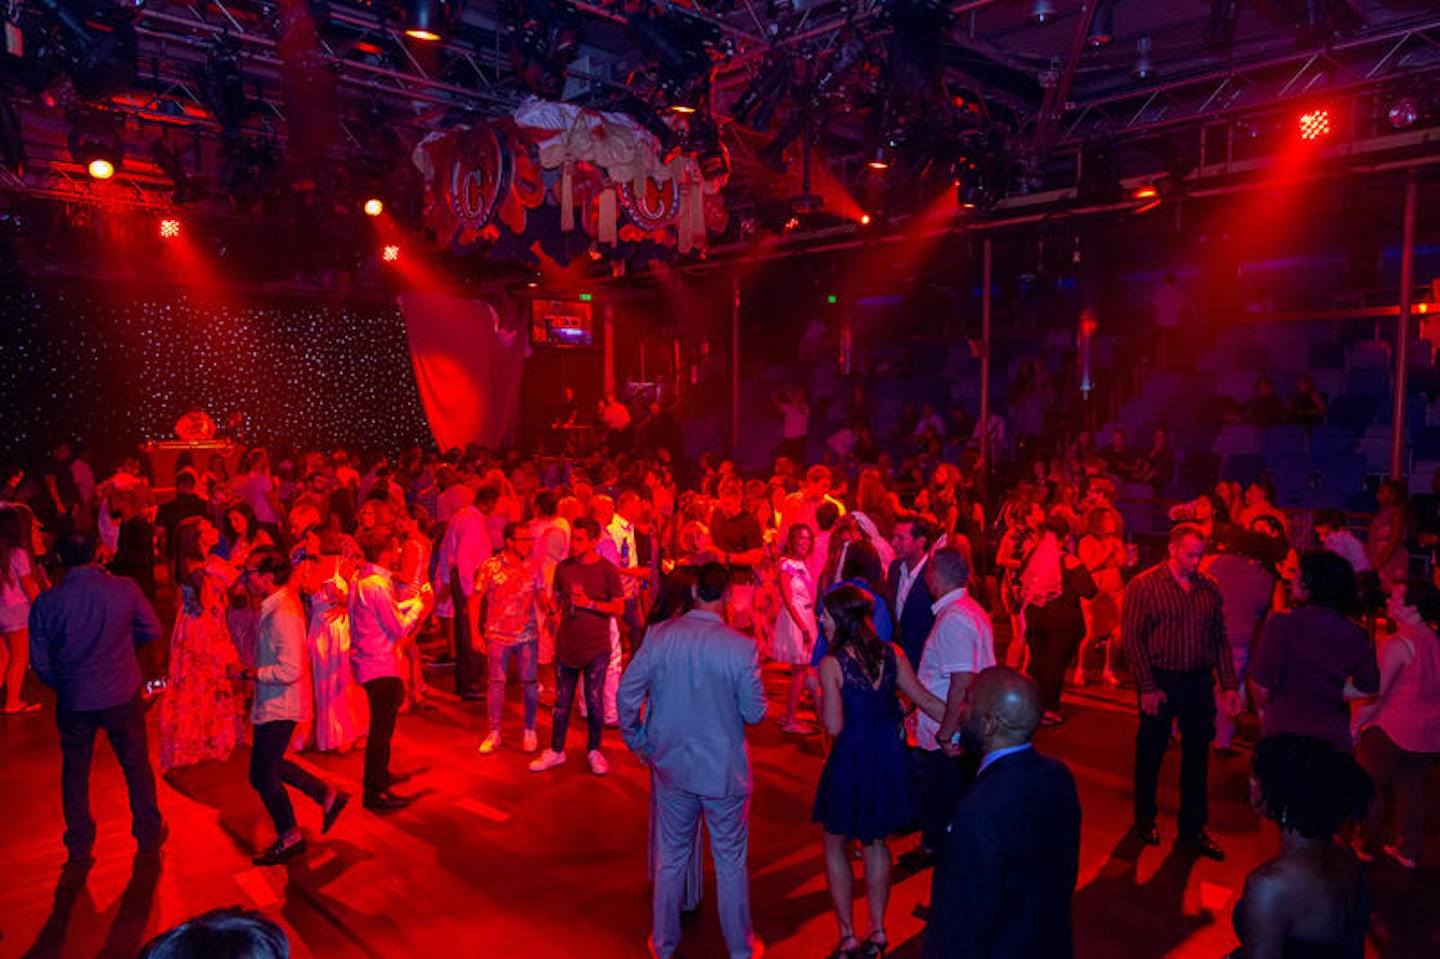 "The Ultimate Night Club Experience" in Studio B on Mariner of the Seas